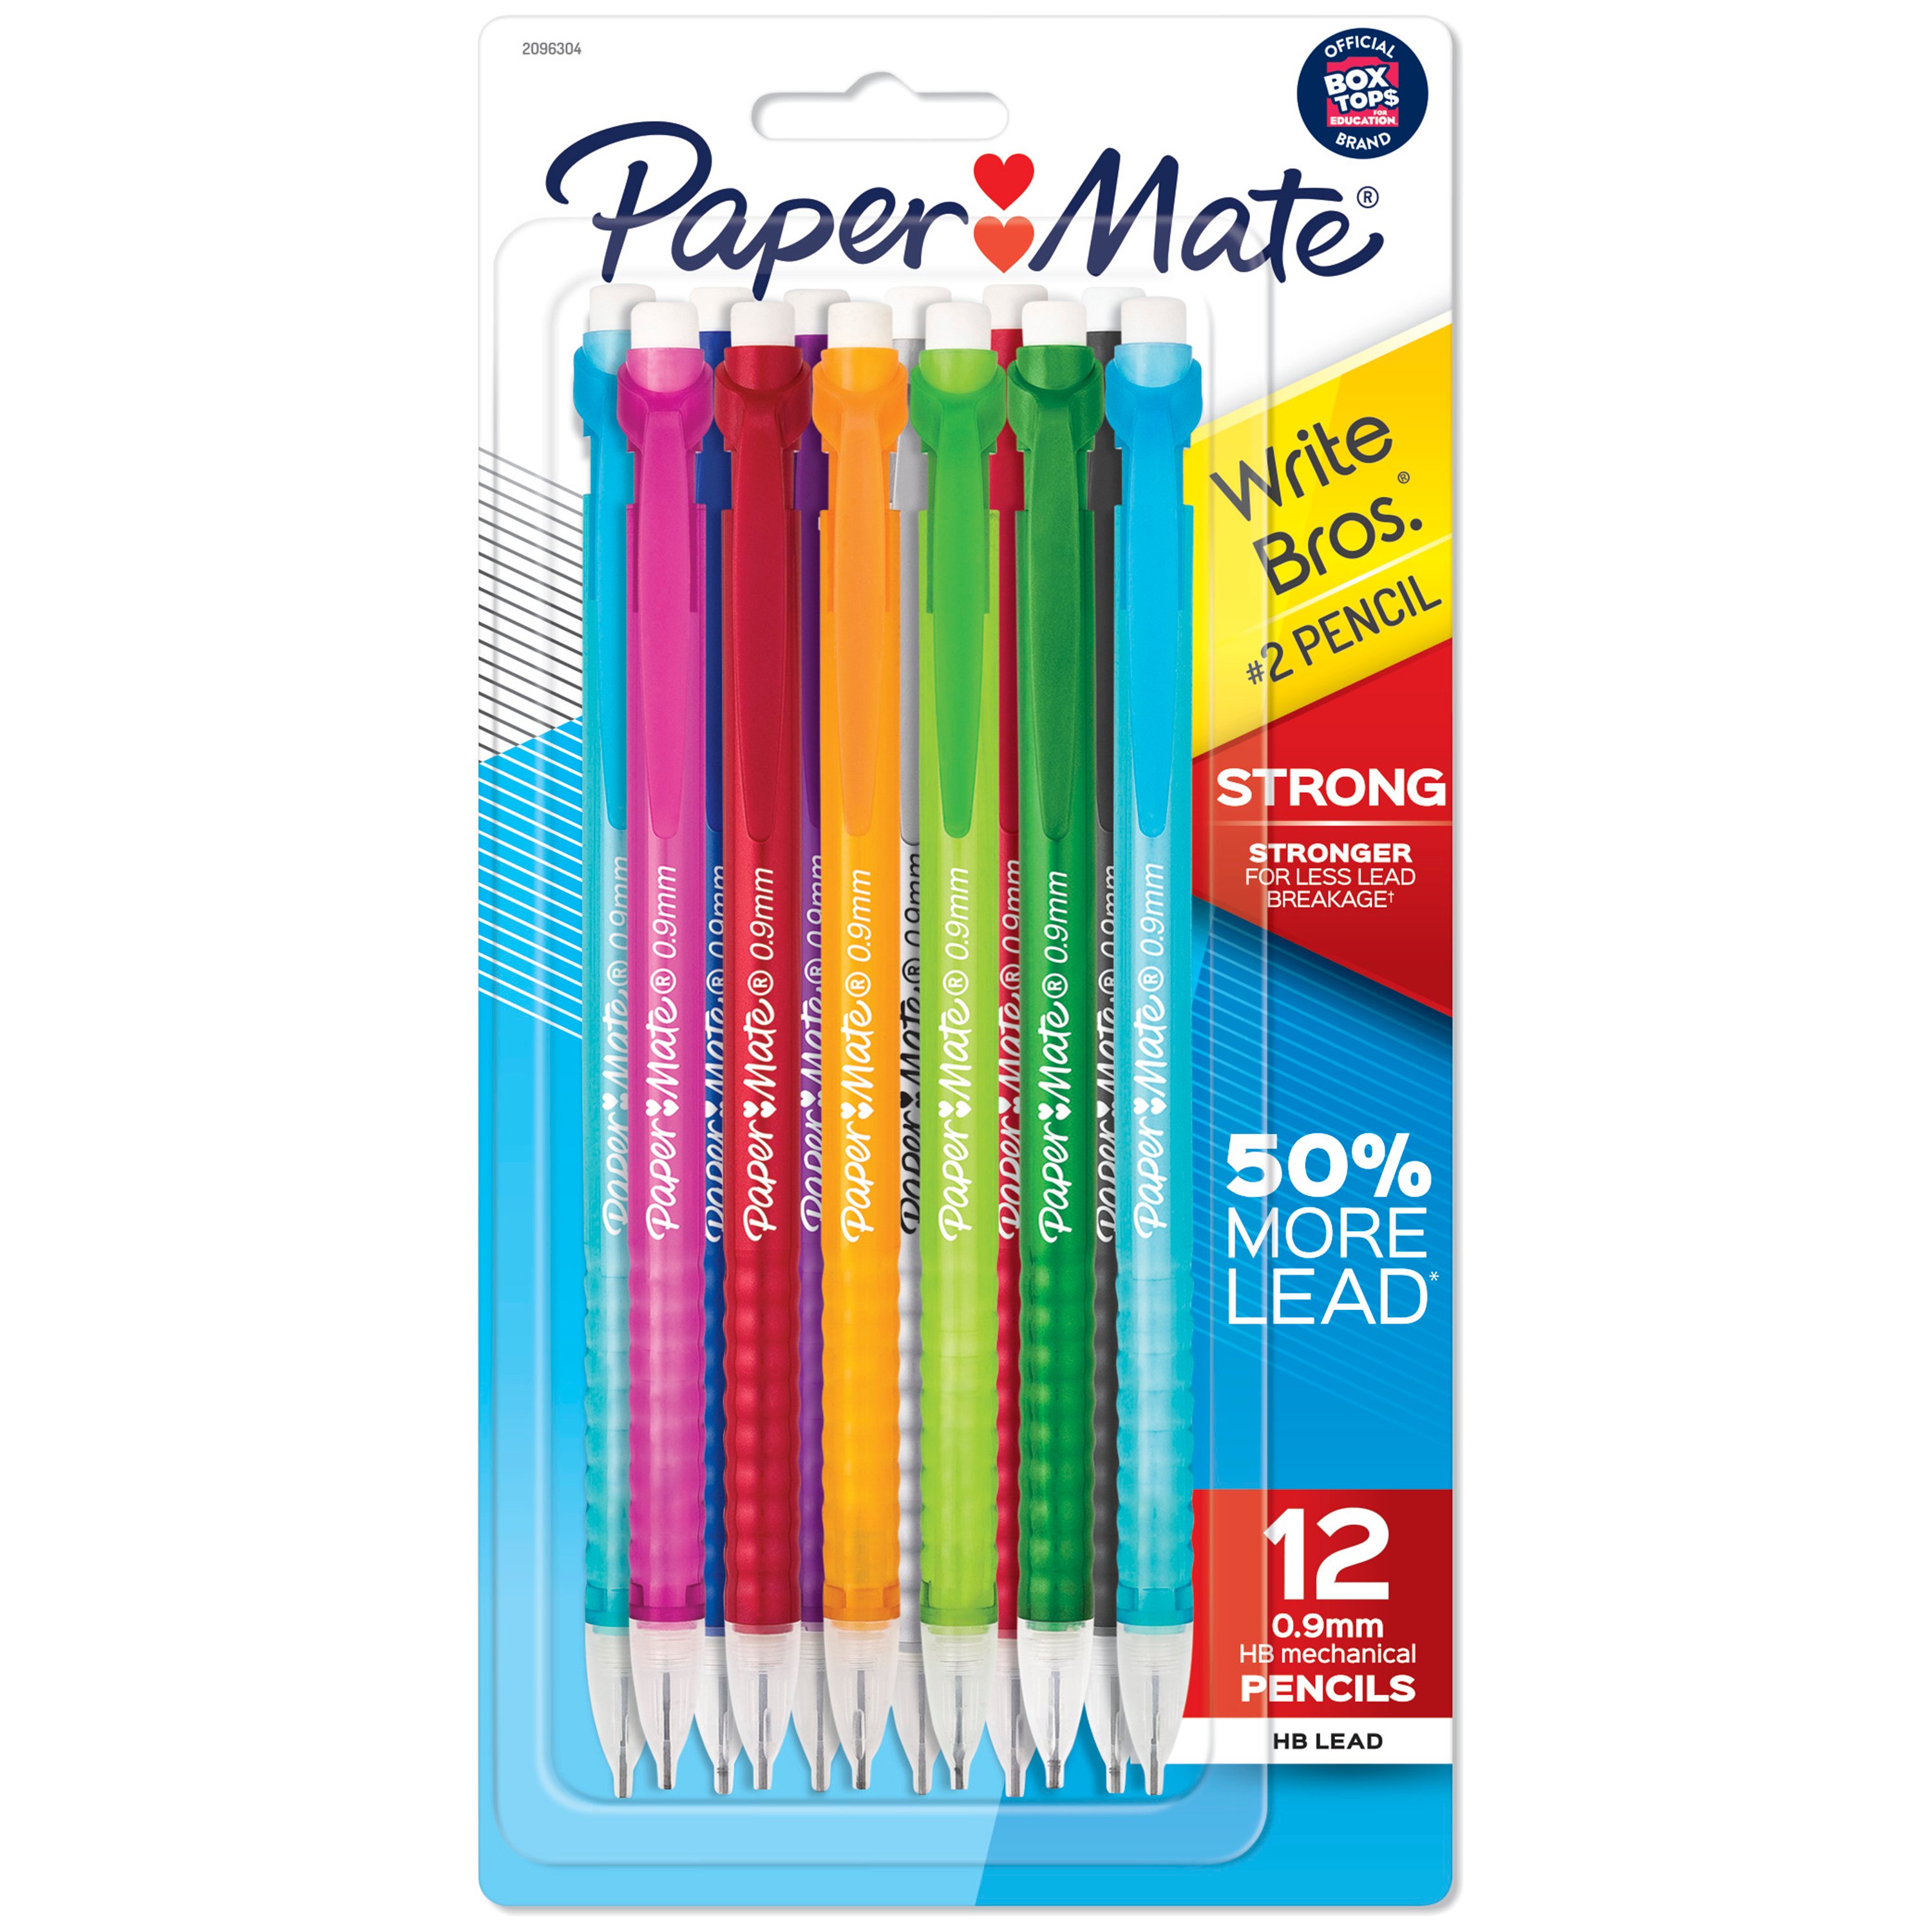 Papermate Slim Chrome Set Ballpoint Pen & 0.9 Pencil Made In Usa